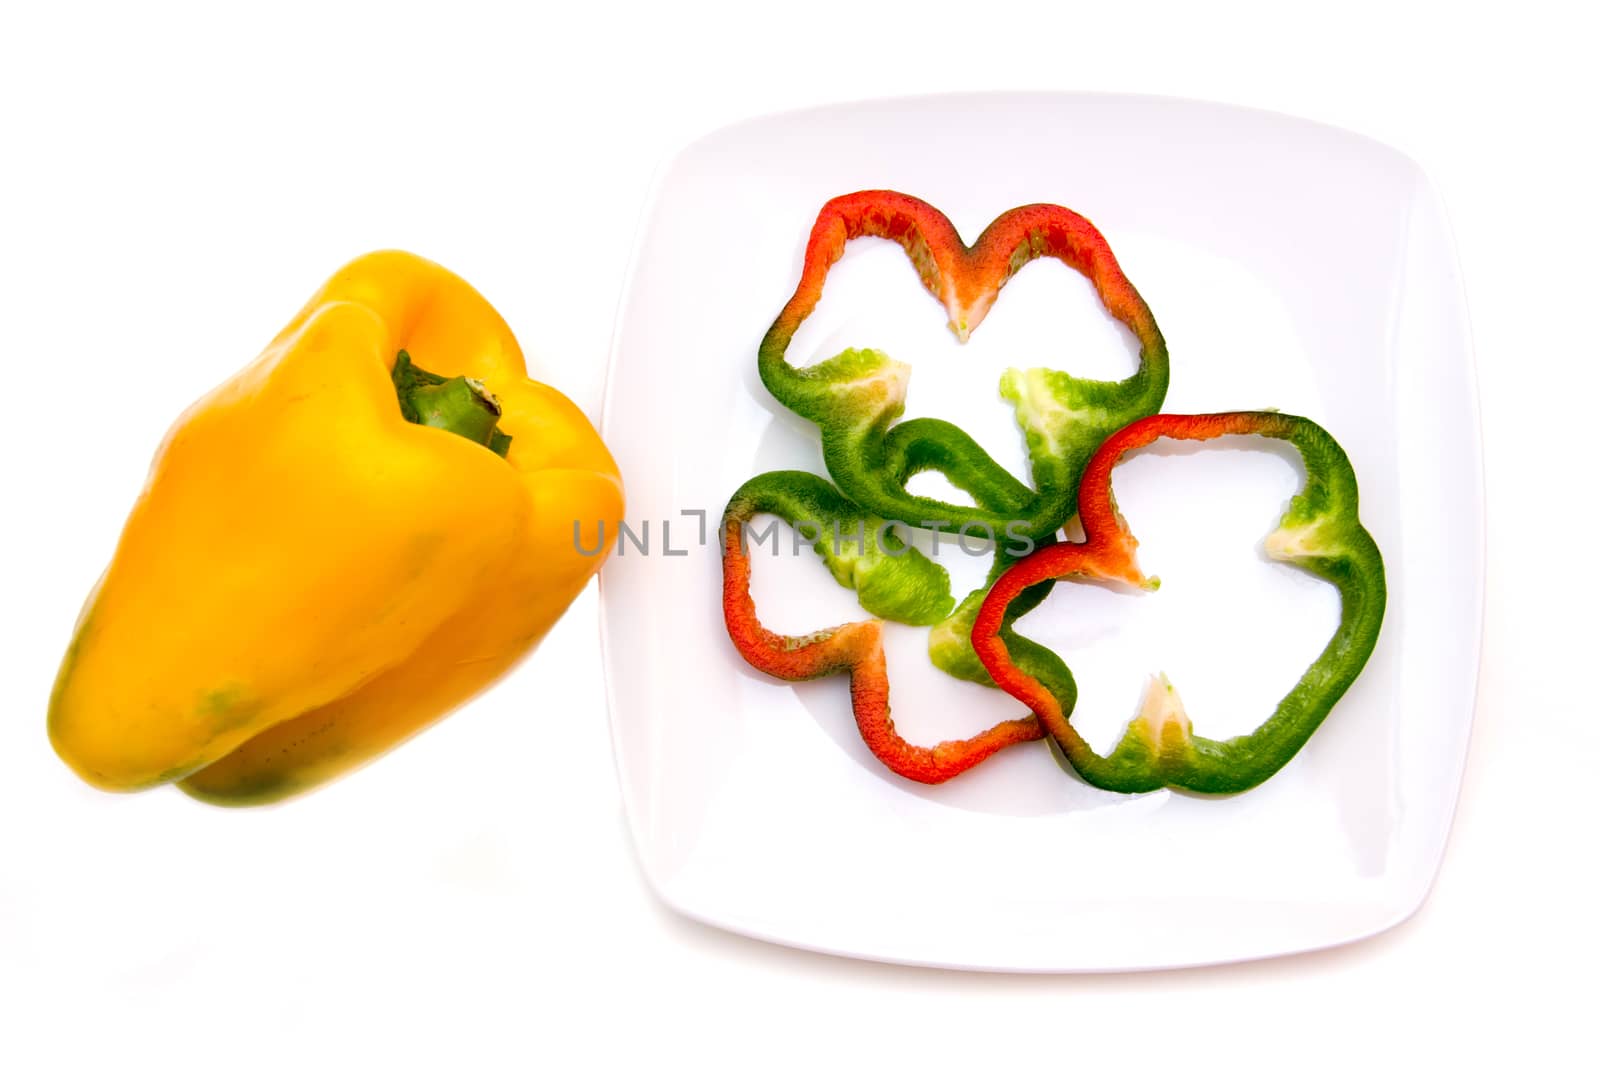 Pepper slices on plate from above by spafra